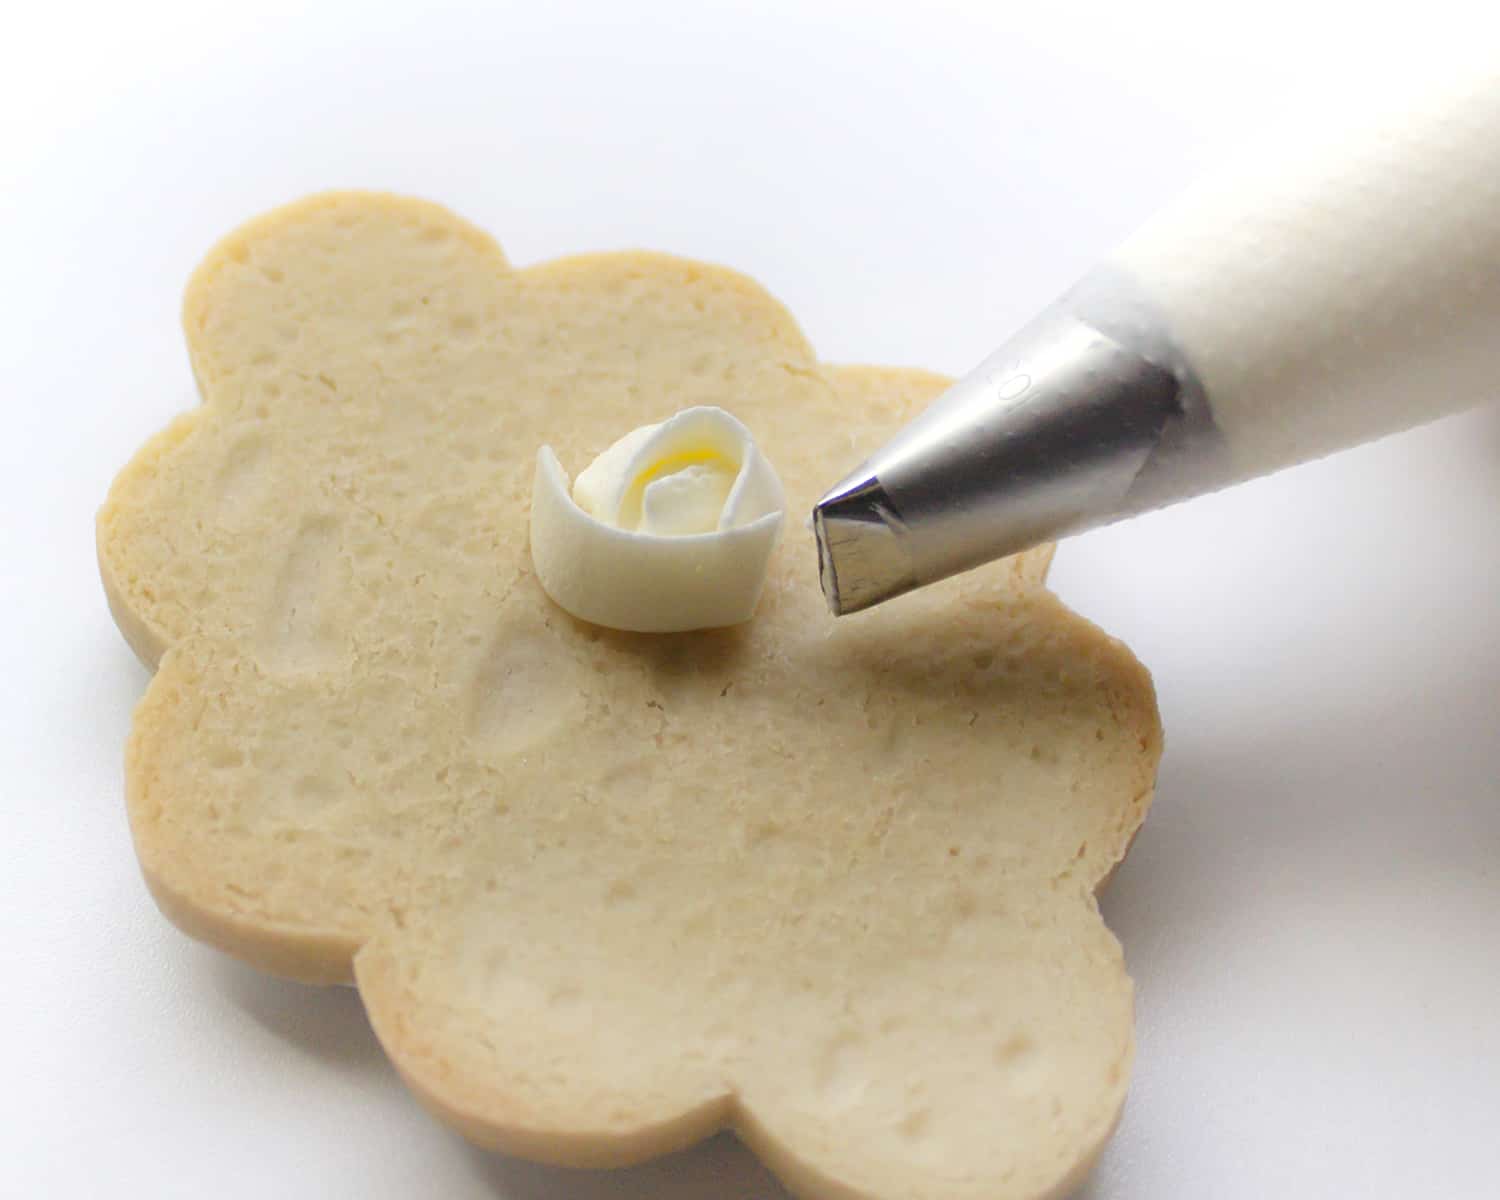 Making a flower shape on a cookie